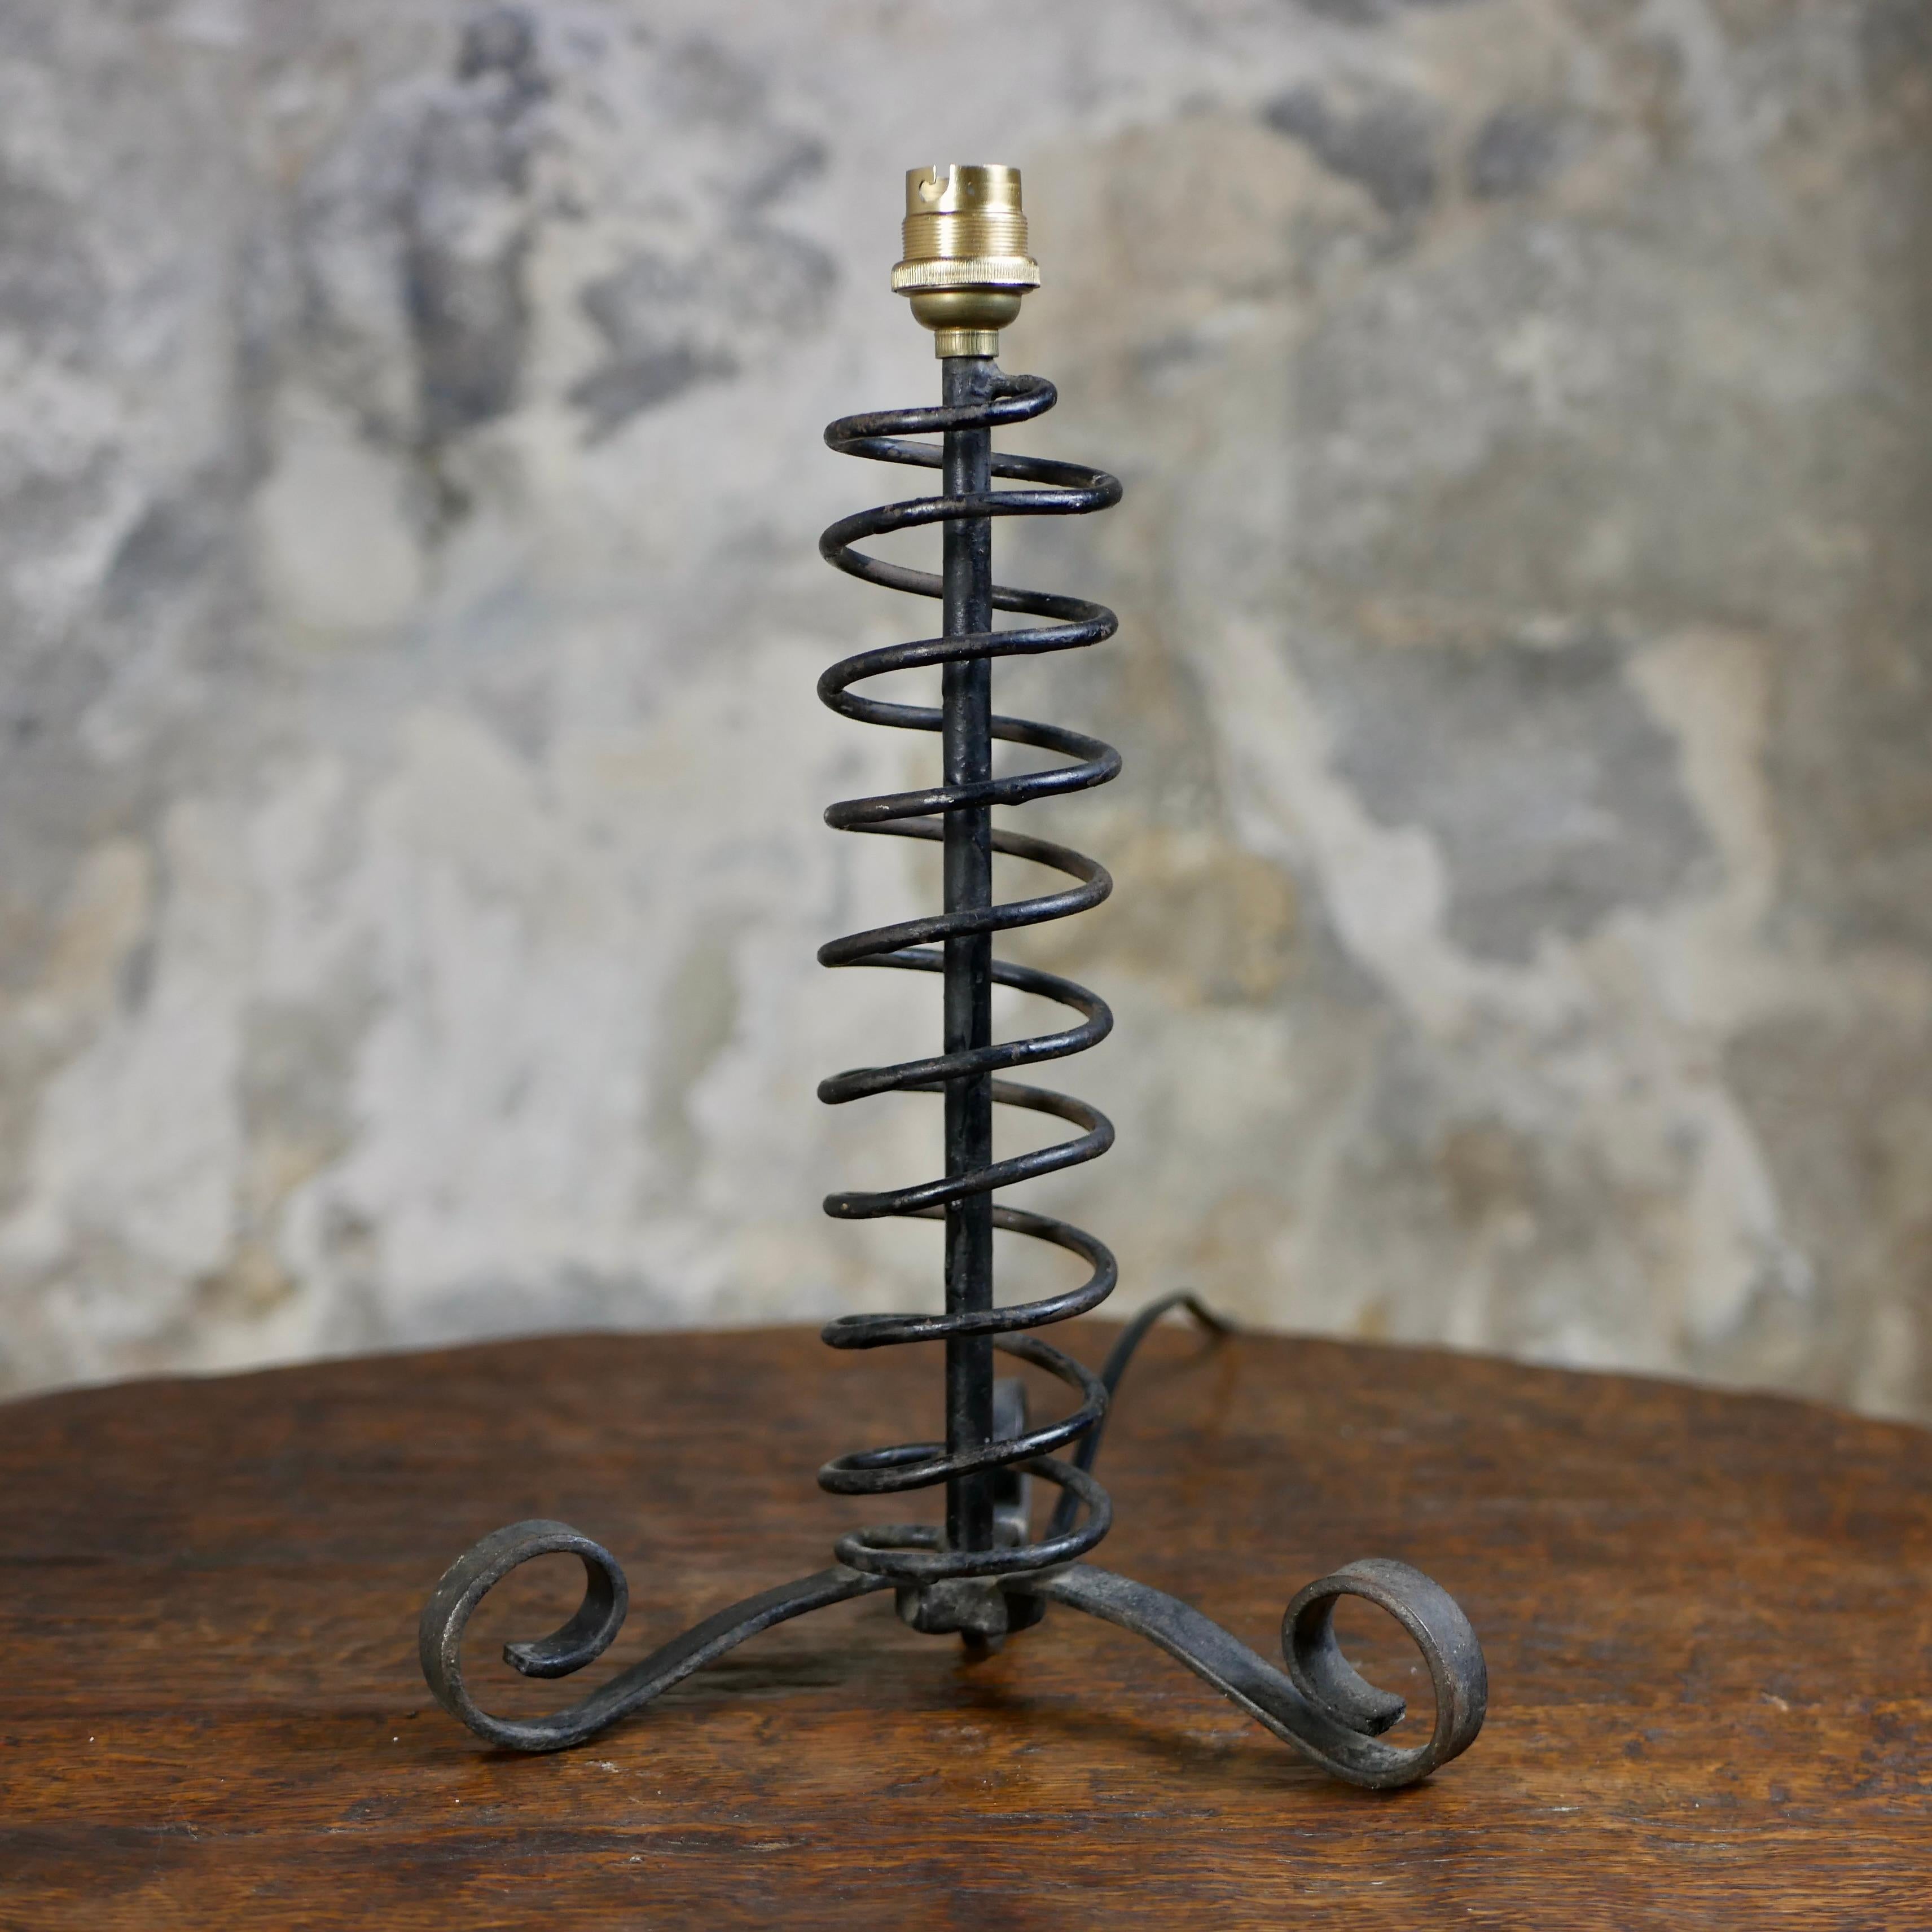 Cute brutalist spring table lamp in wrought iron, anonymous French work from the 1950s.
Dimensions : H32, D22
Good condition.